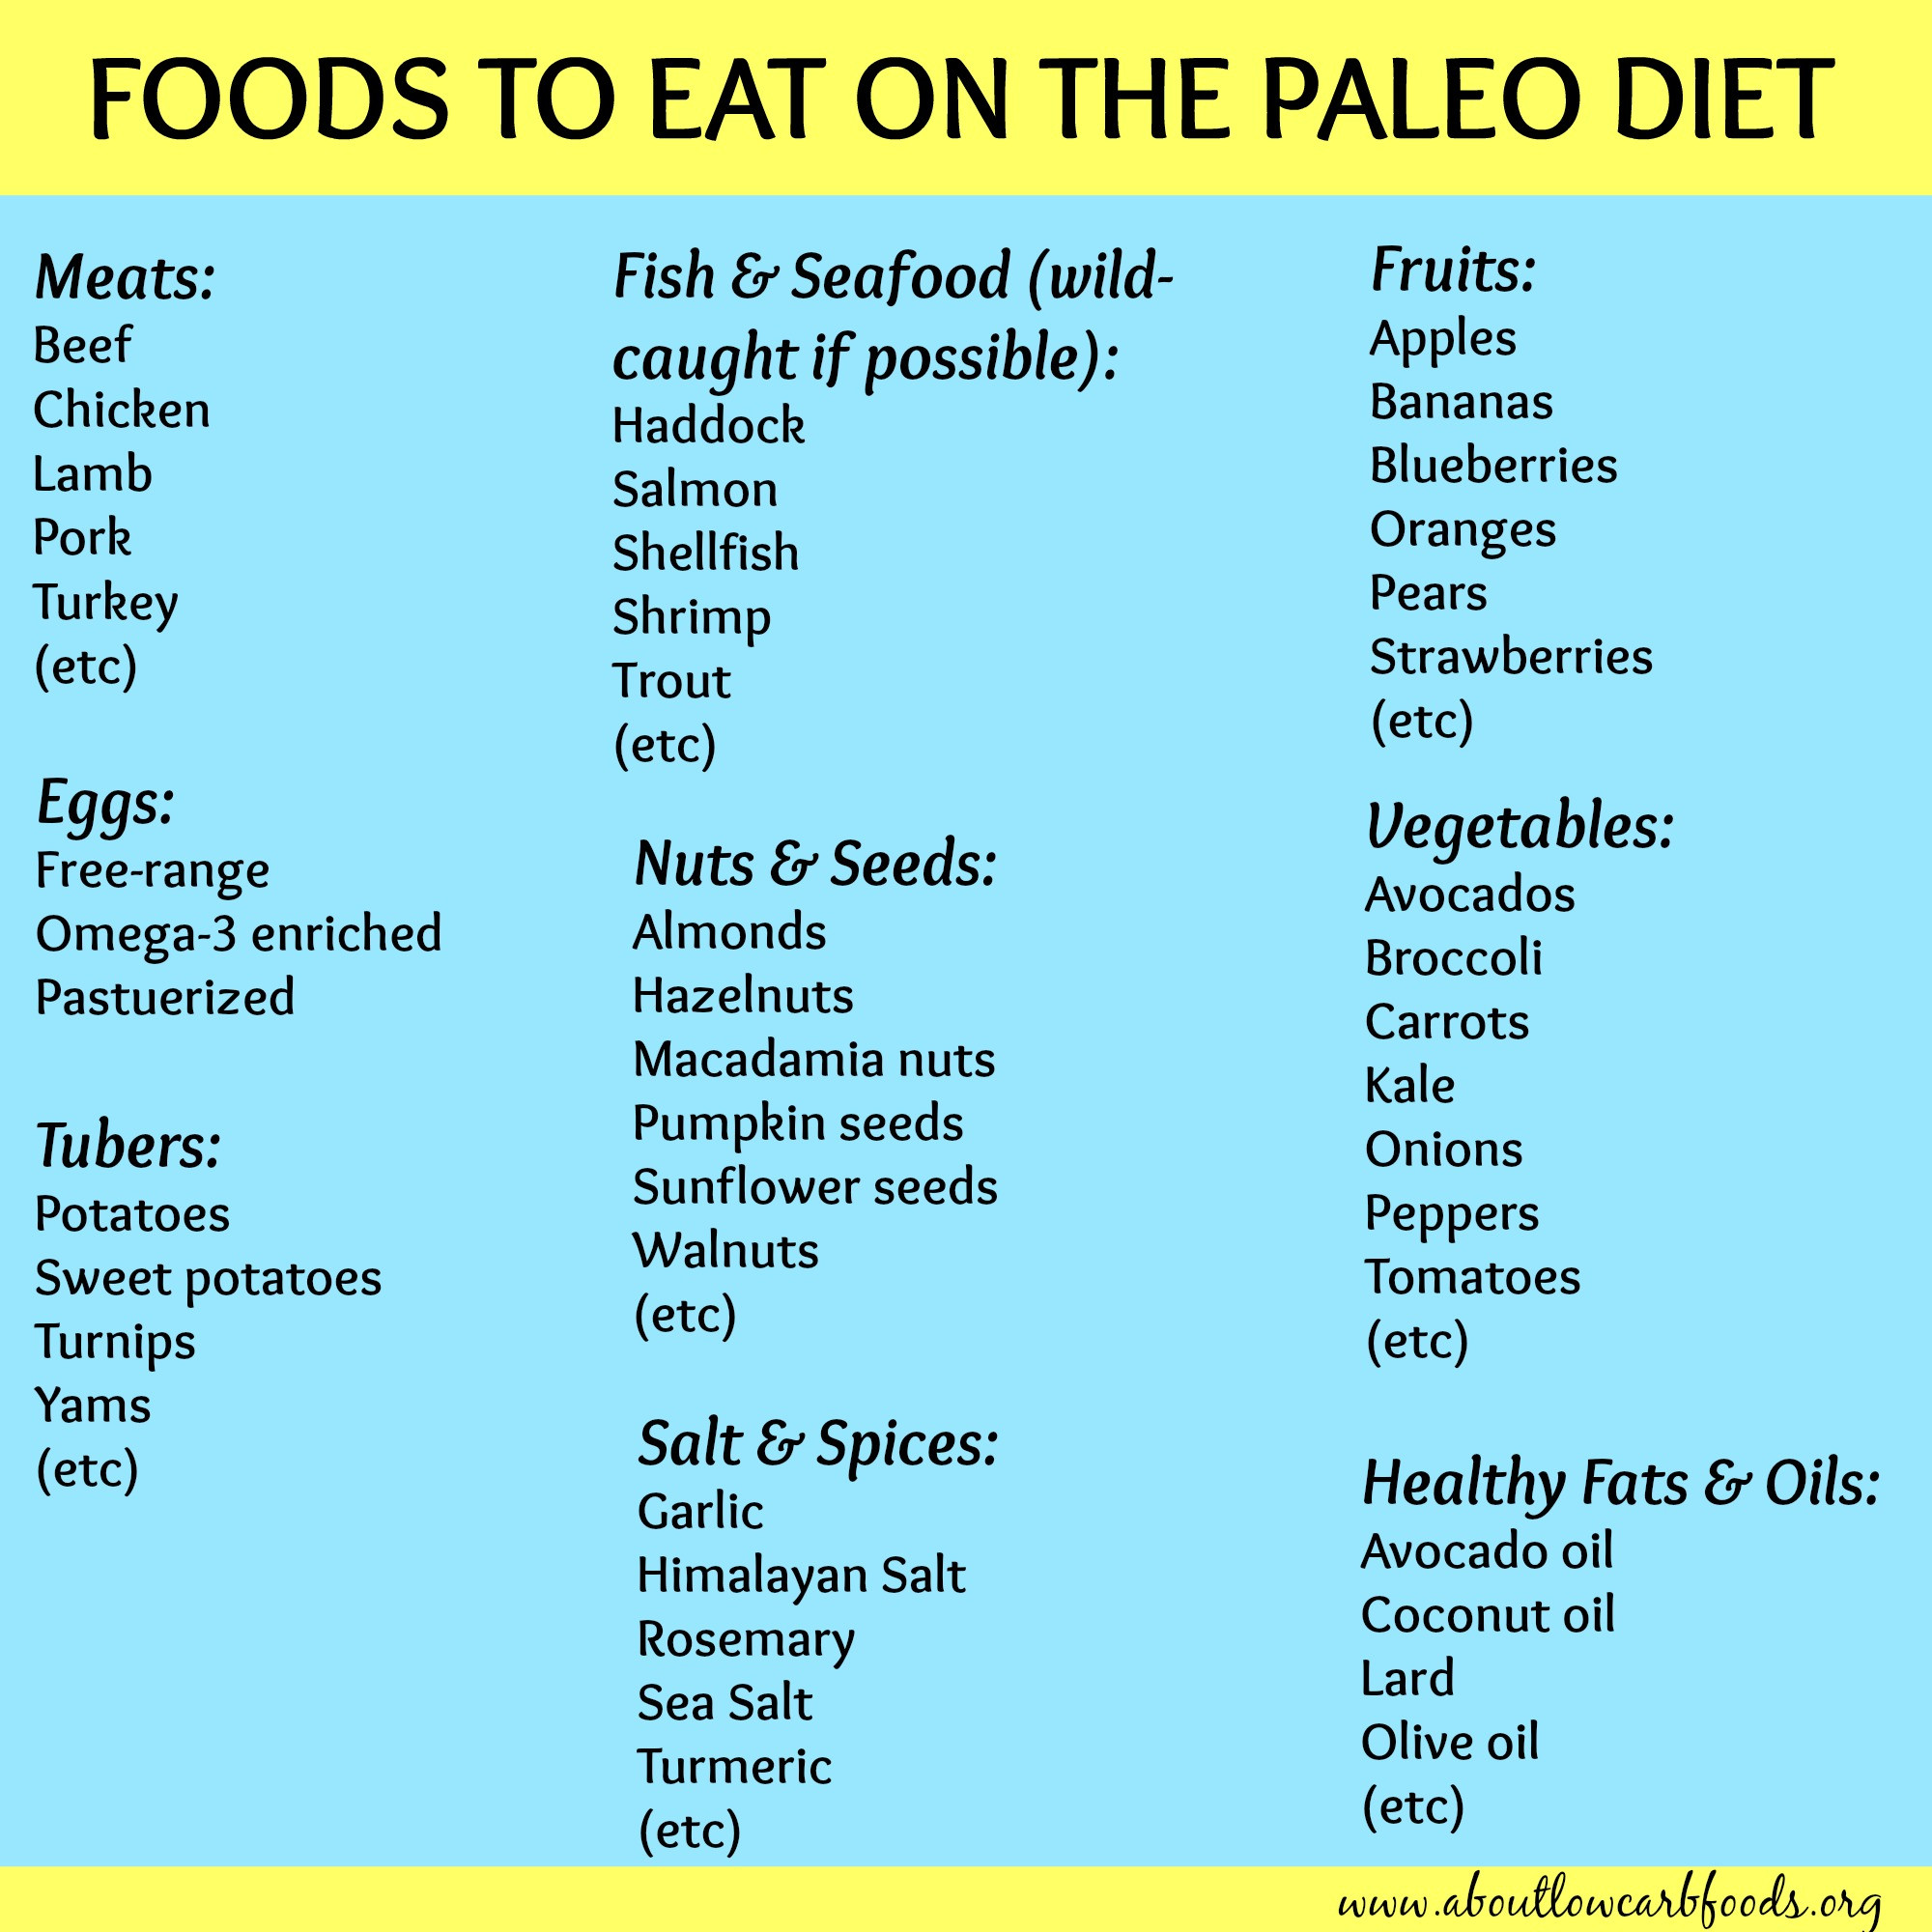 Free Paleo Diet Plan
 Paleo Diet Meal Plan Why It’s So Popular About Low Carb